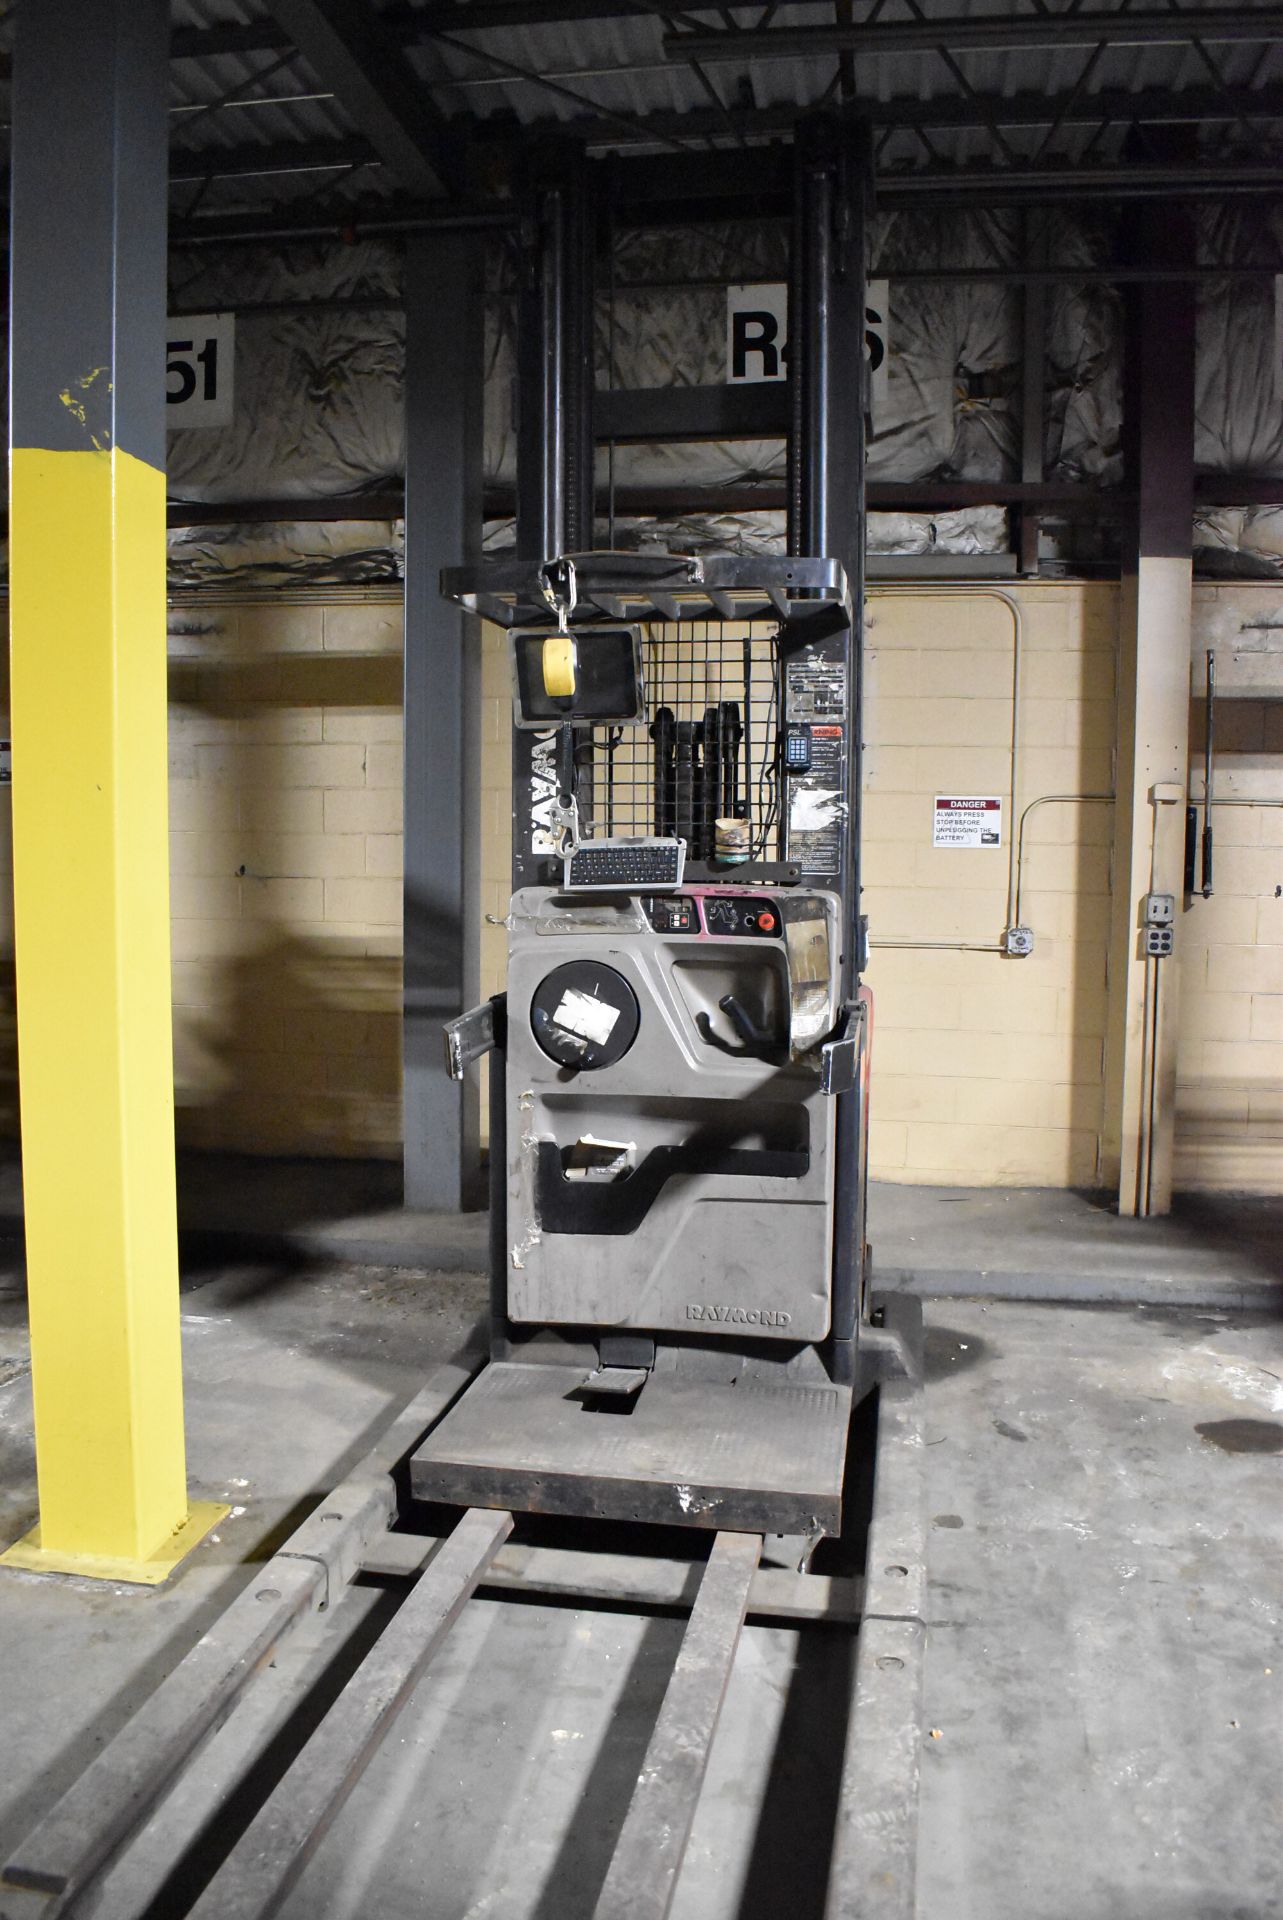 RAYMOND EASI-OPC30TT 1,600 LB. CAPACITY 24V ELECTRIC ORDER PICKER WITH 330" MAX. LIFT HEIGHT, 3- - Image 2 of 10